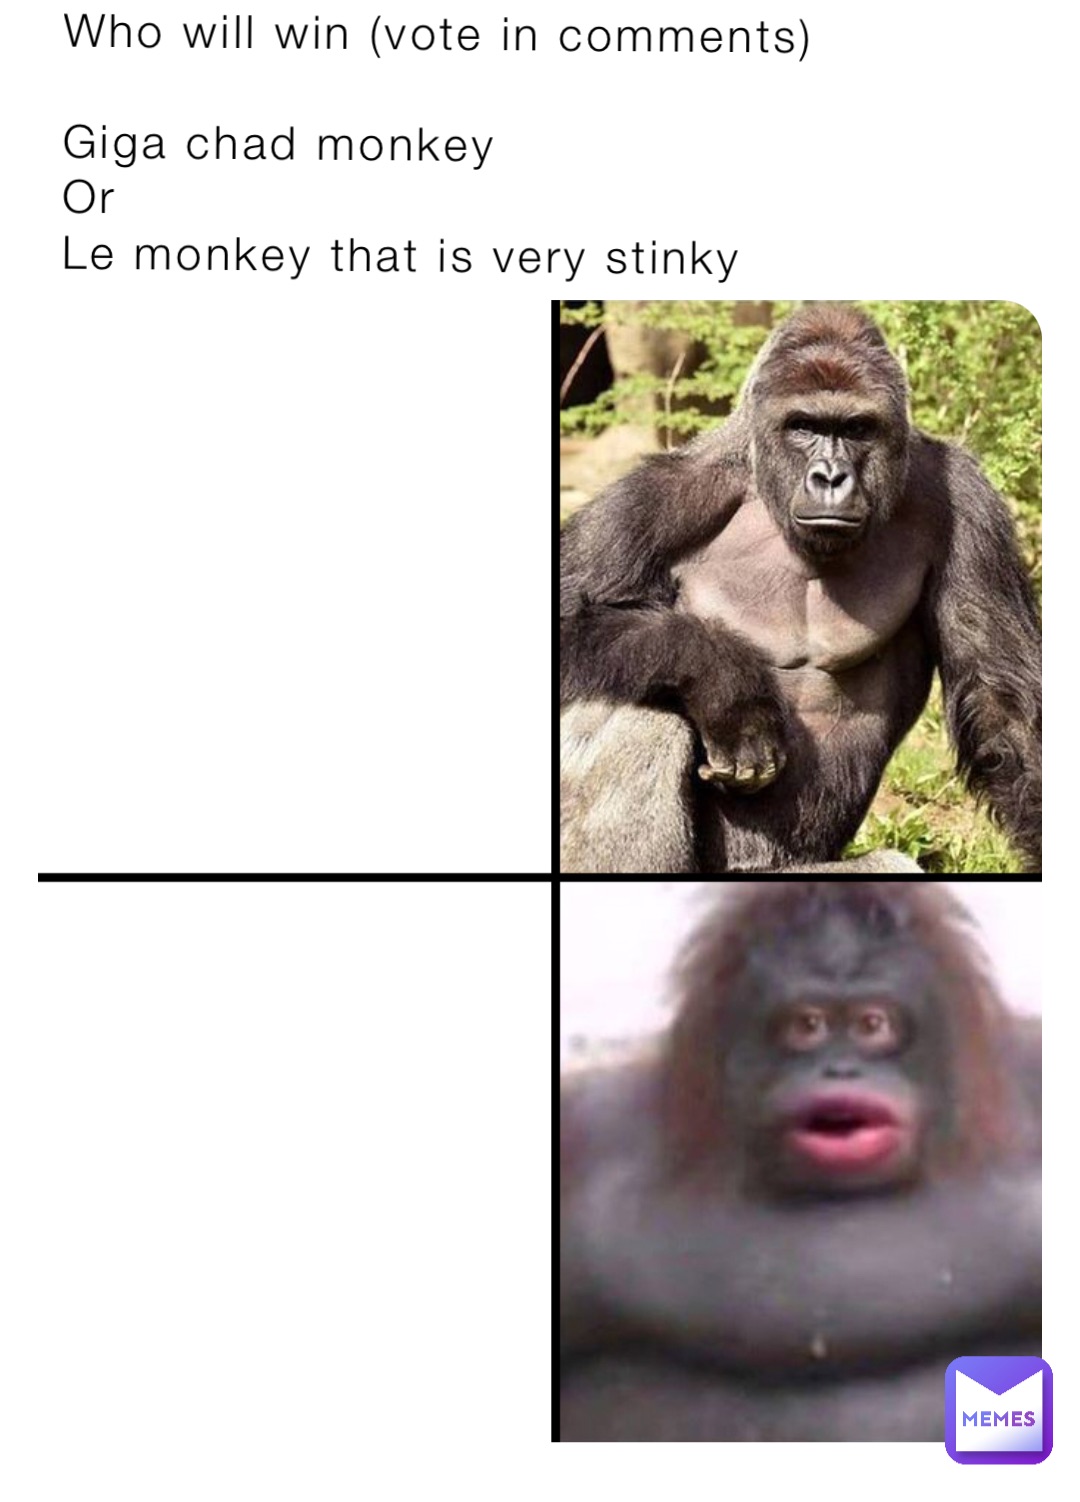 Who will win (vote in comments) Giga chad monkey Or Le monkey that